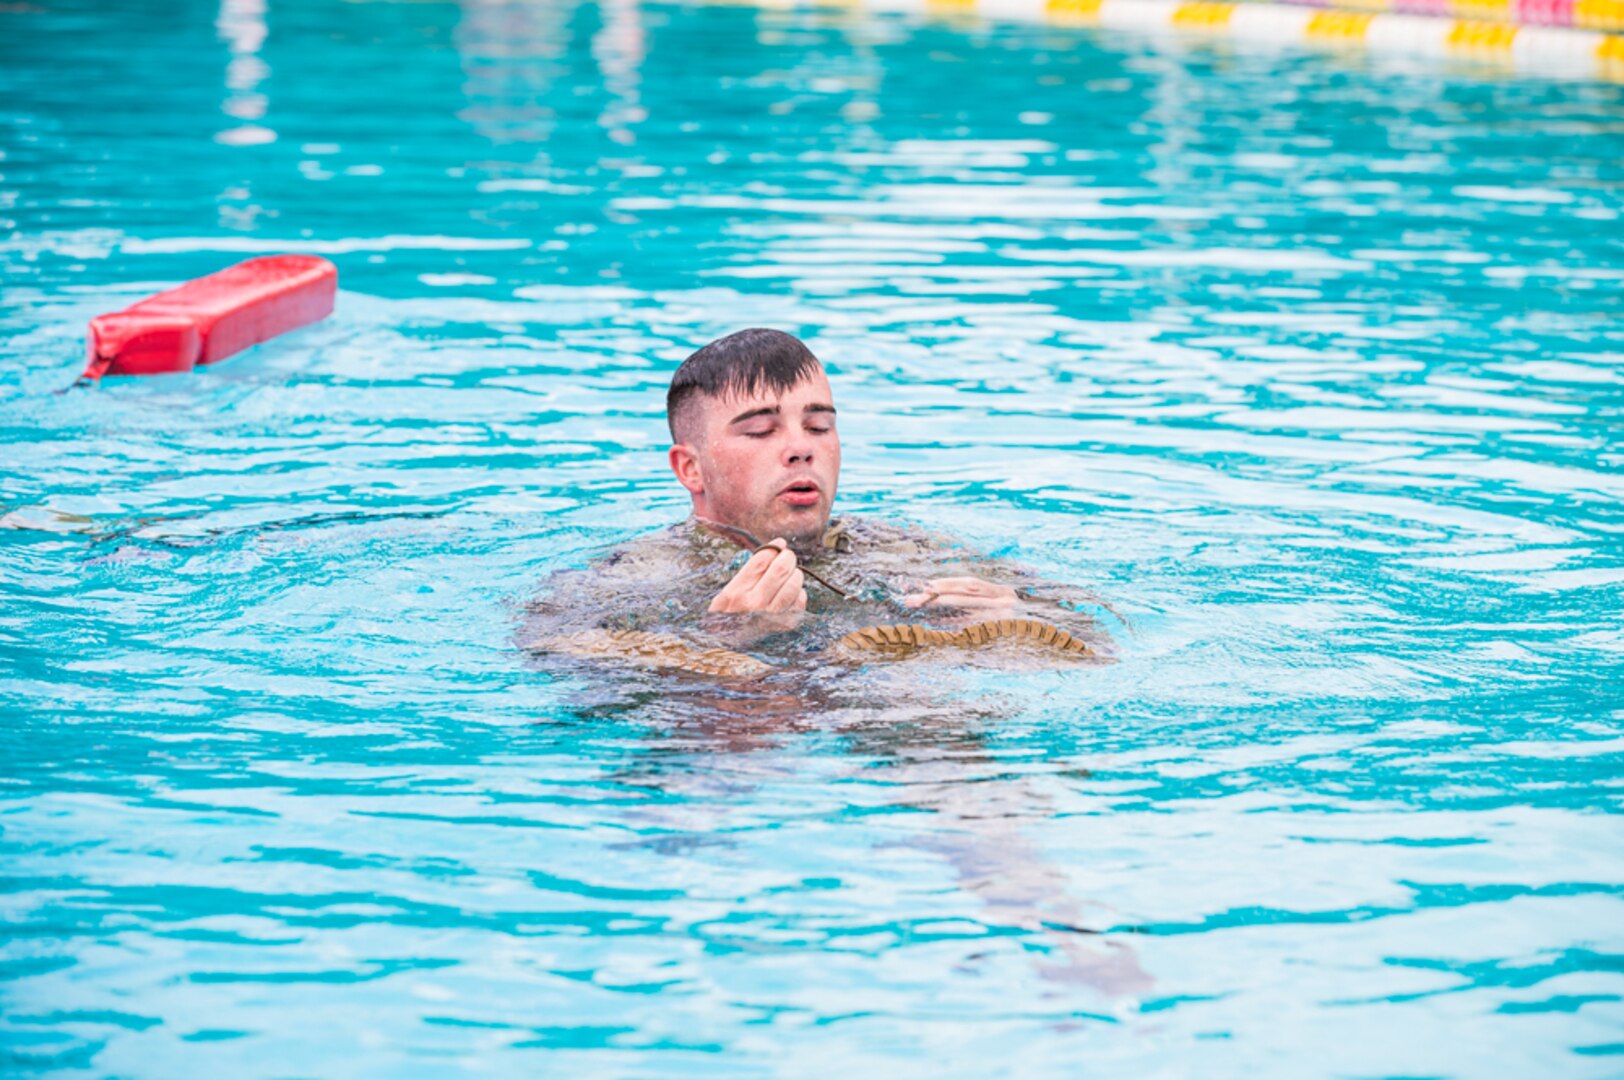 Army Staff Sgt. Edward Nelan competes in the water survival portion of the 2021 U.S. Army Medical Command Best Leader Competition